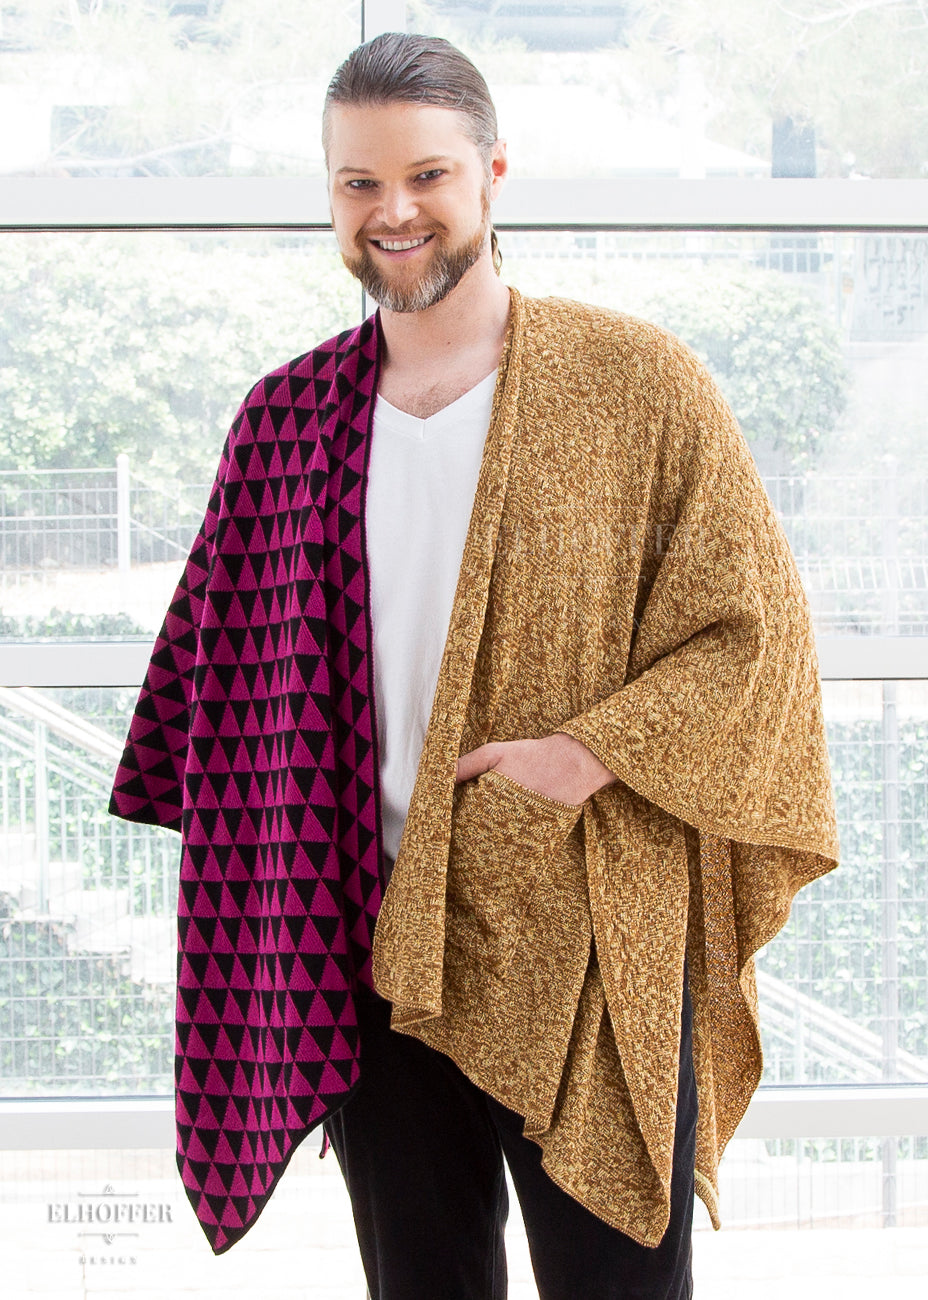 Bryan, a fair skinned and blonde haired size L model with facial hair, wears the one size poncho. One side of the poncho is a black and pink triangle pattern and the other side is a mustard blend of yarn with a pocket. He has paired it with black jeans and a white t shirt.